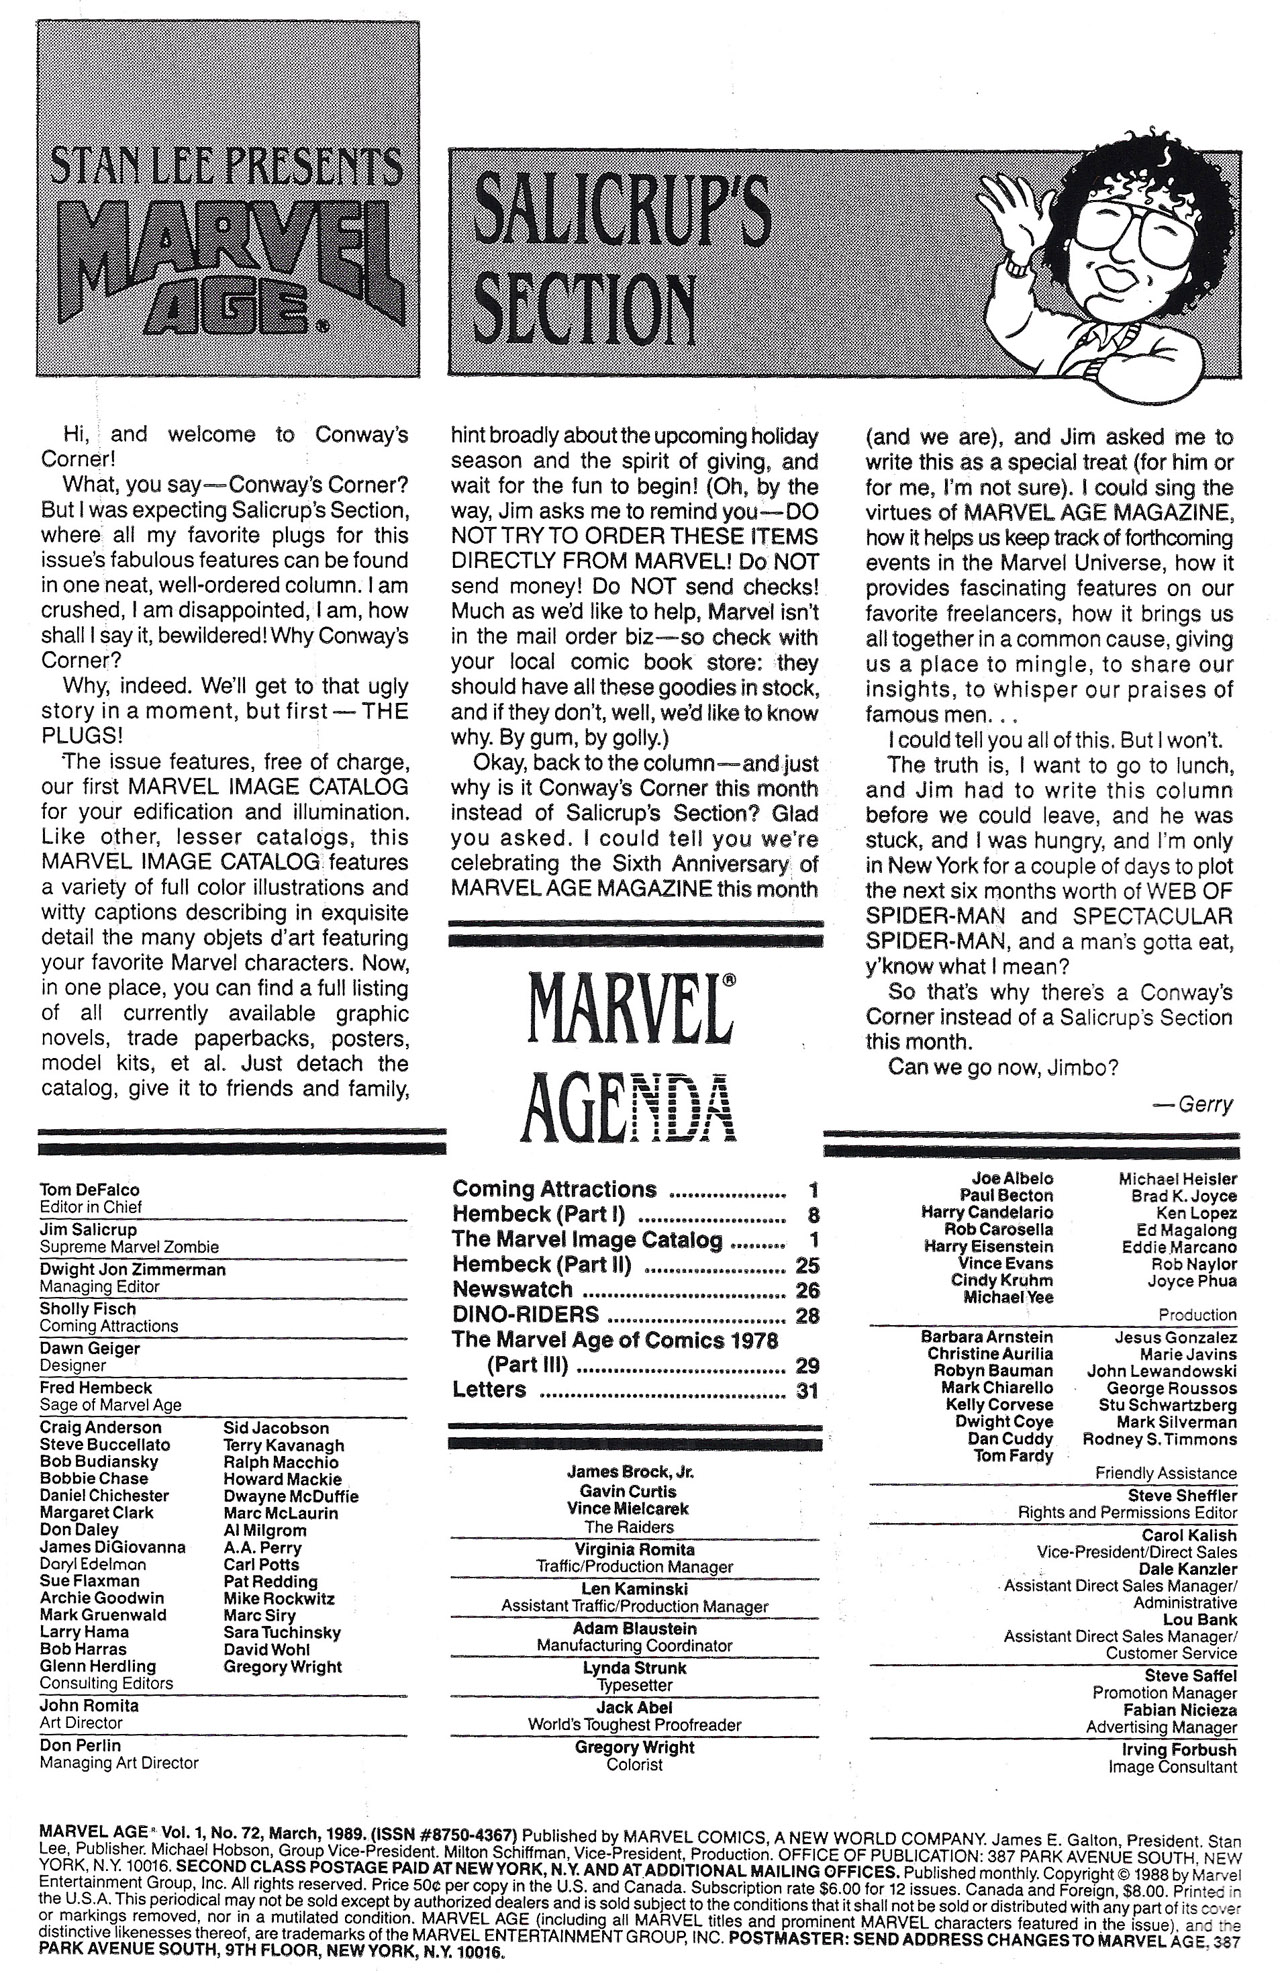 Read online Marvel Age comic -  Issue #72 - 2